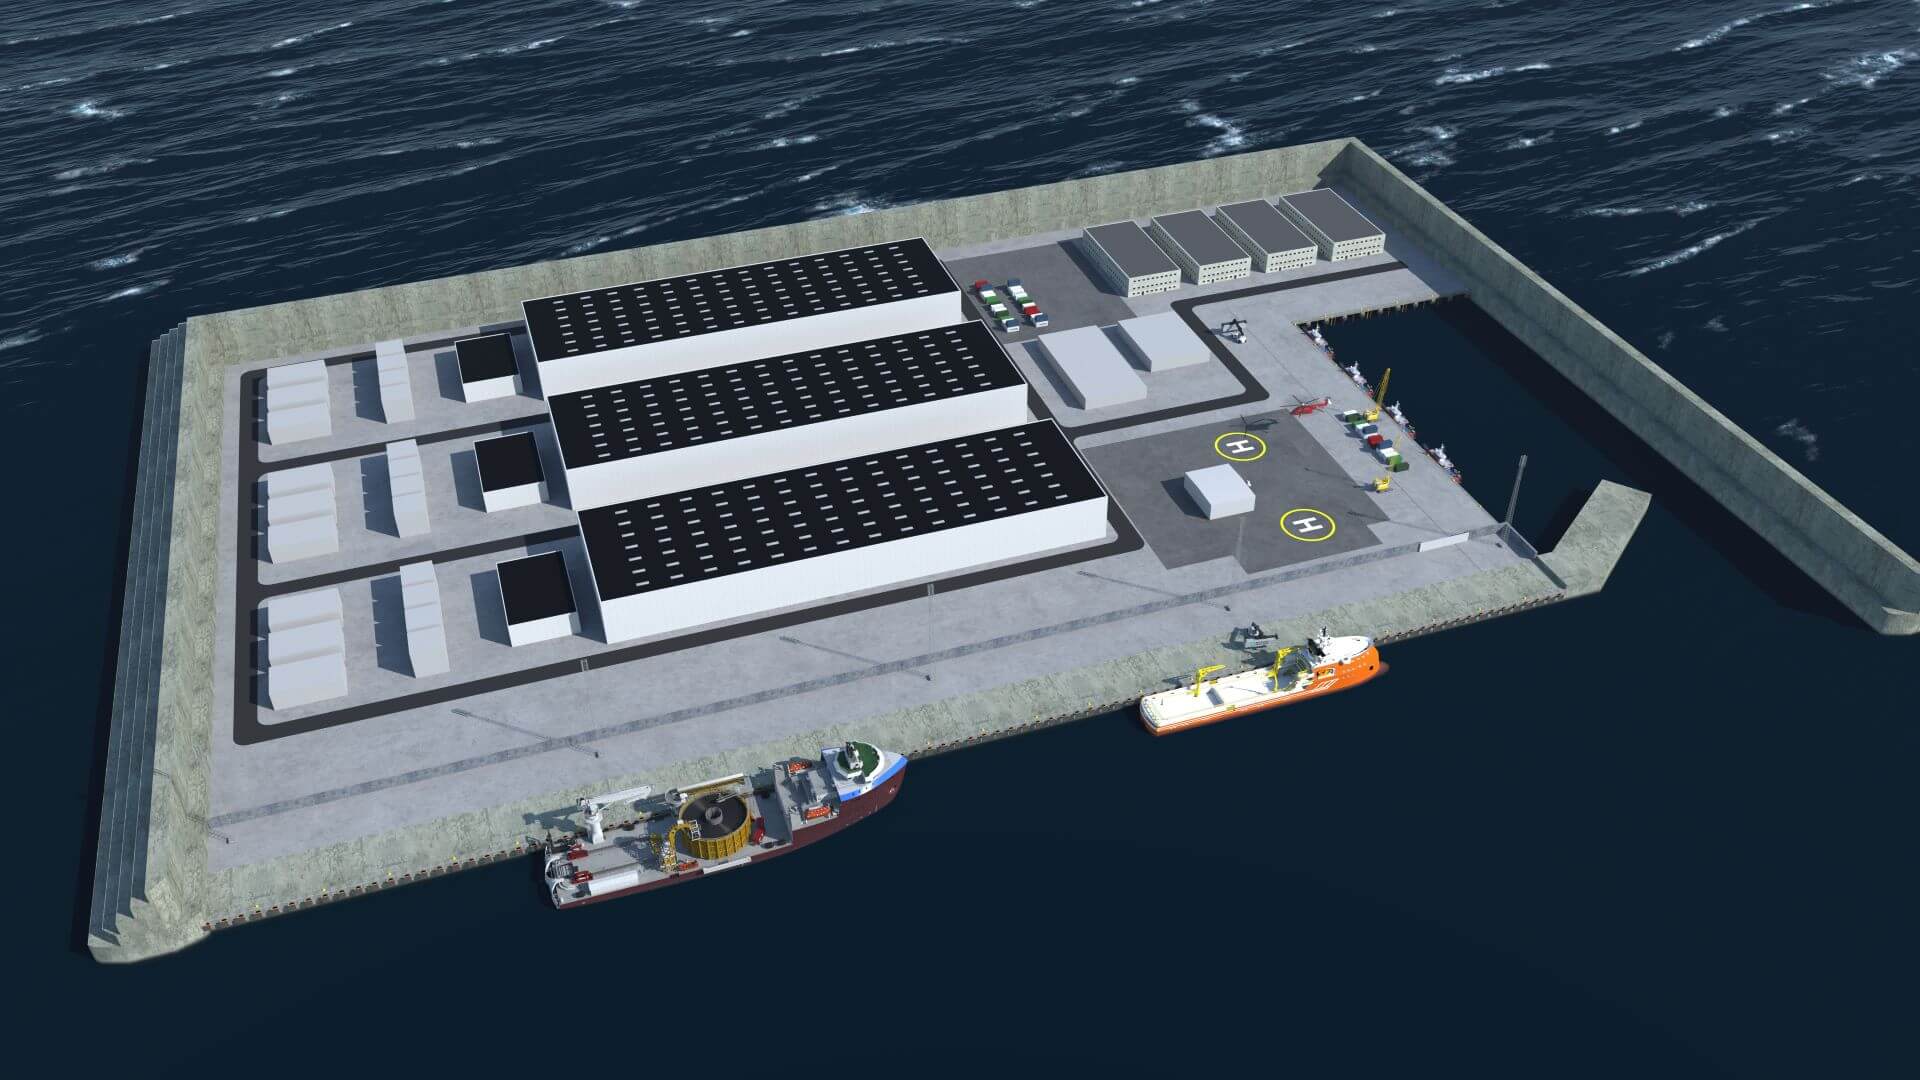 Artist's impression of a proposed energy island, showing an aerial view with two tankers alongside the floating energy hub